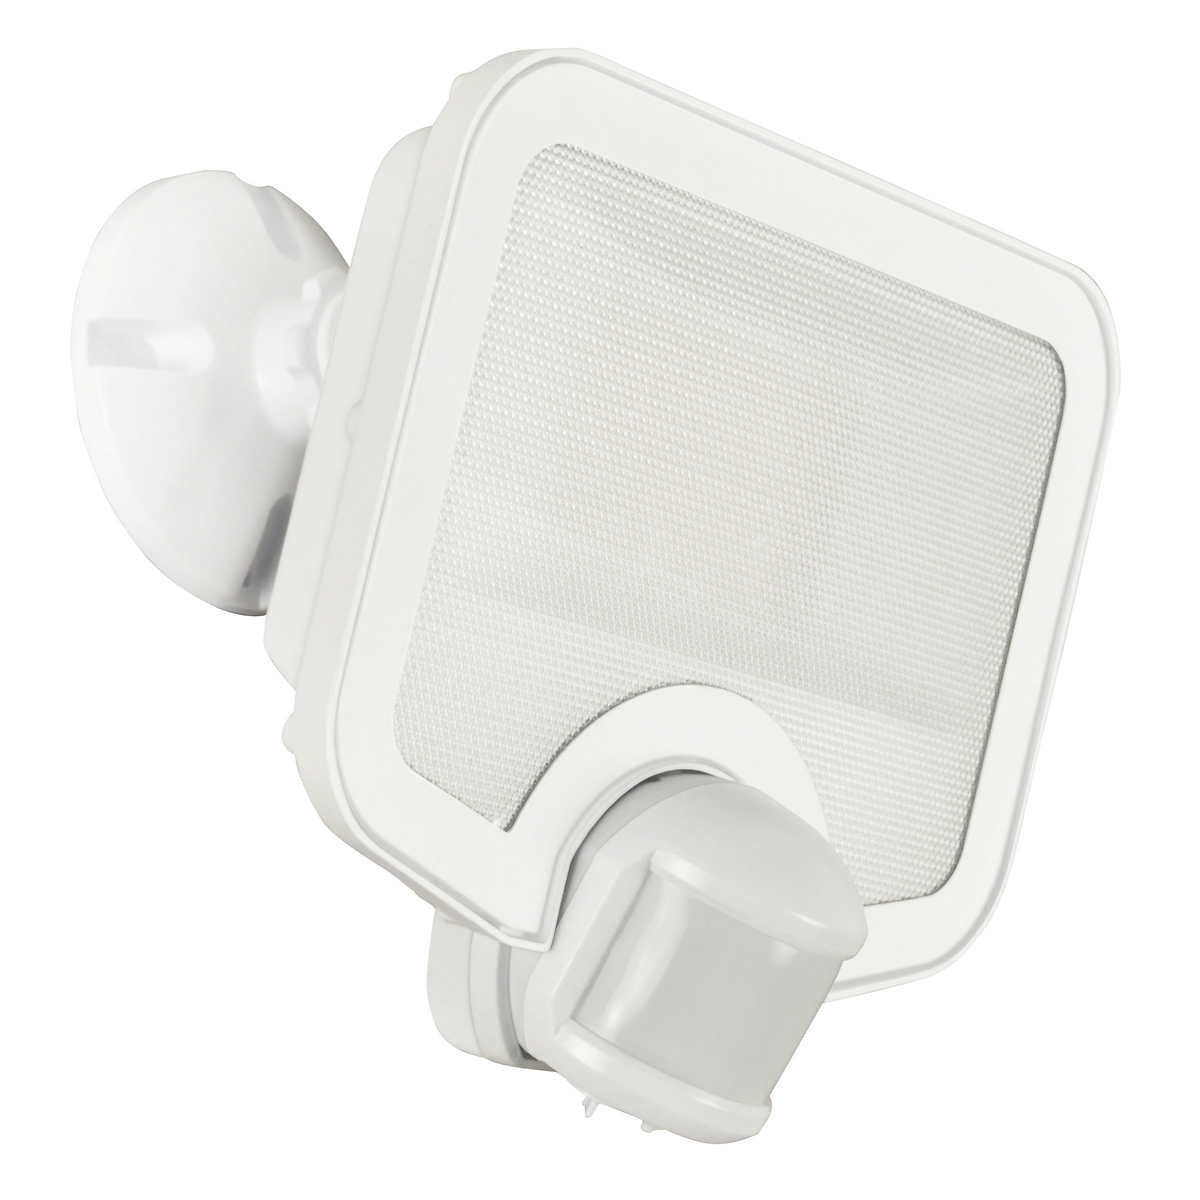 LED MOTION ACTIVATED LIGHT